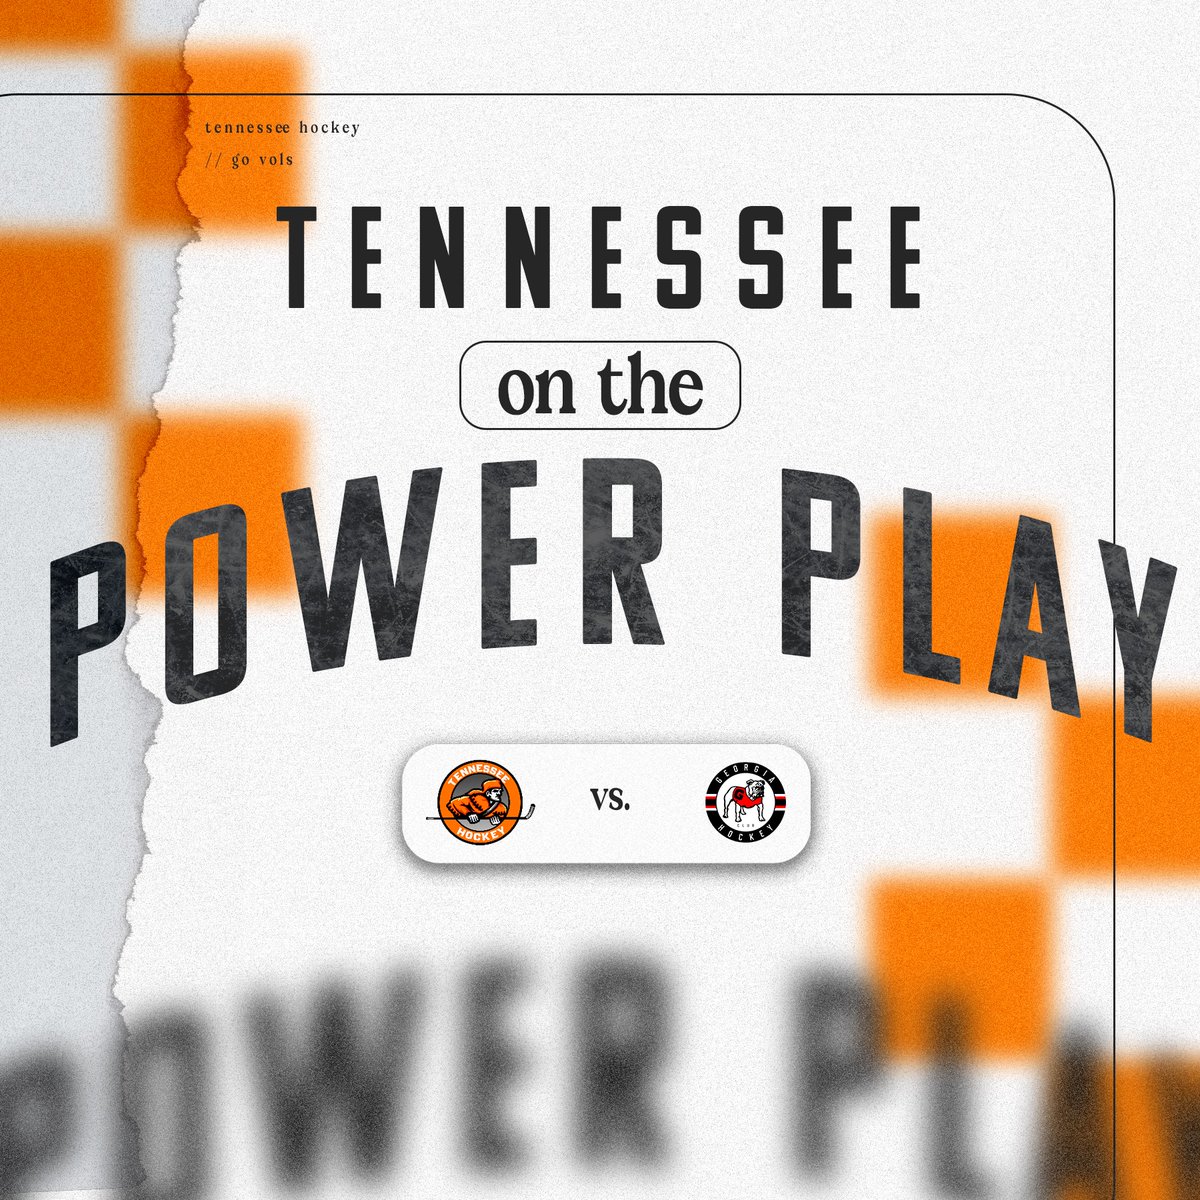 2nd// TENNESSEE POWER PLAY 9:10 to go in the period